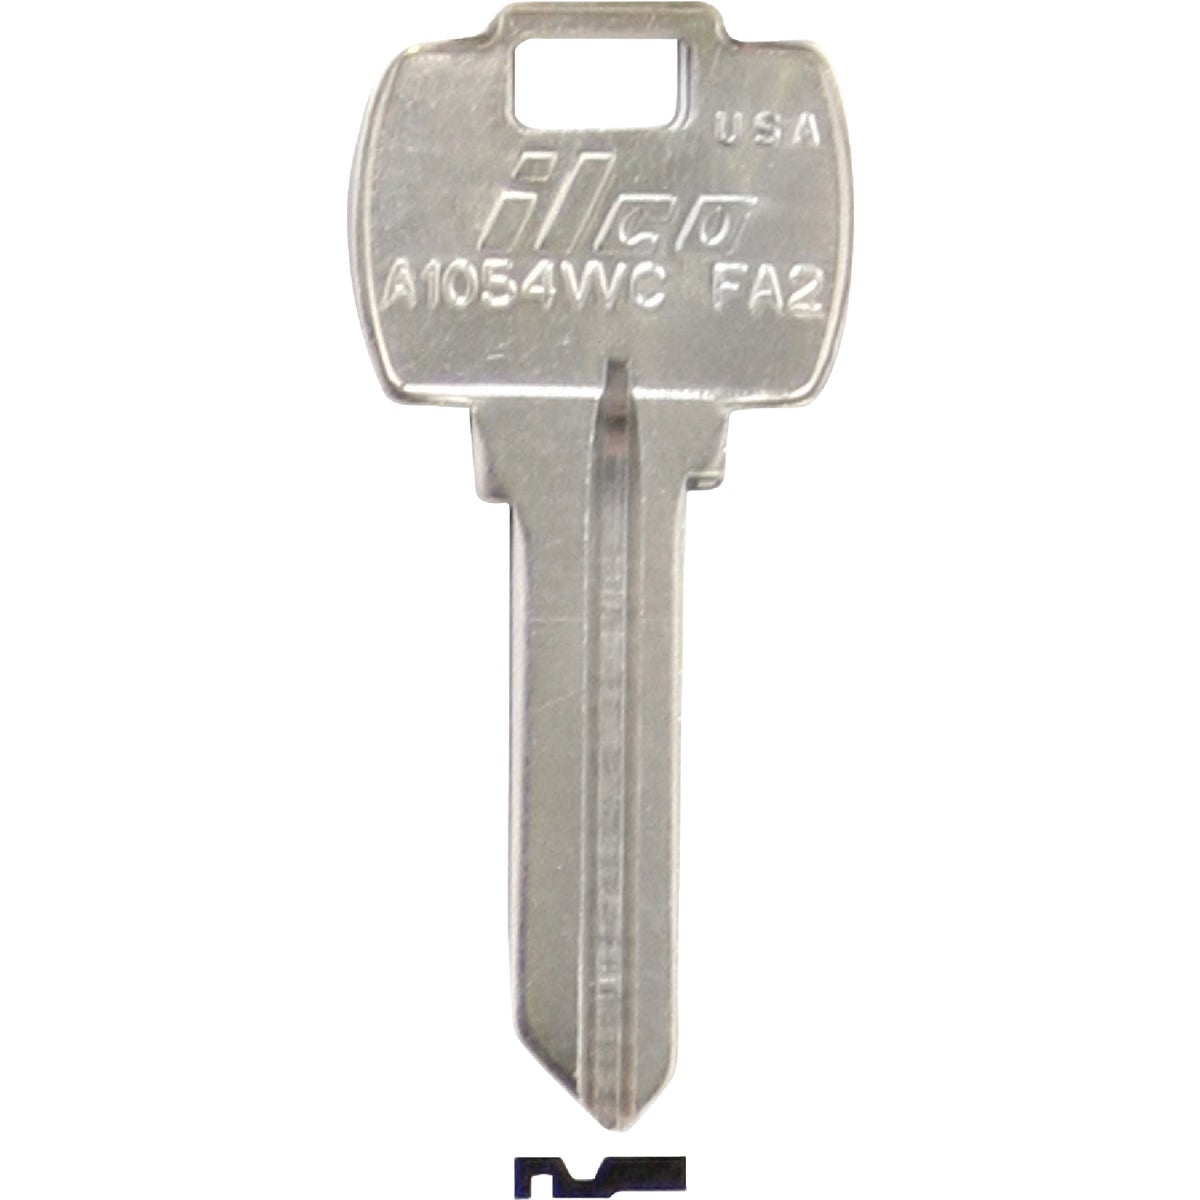 Item 218383, Nickel-plated key blank. When you order one, you will receive 10 keys.